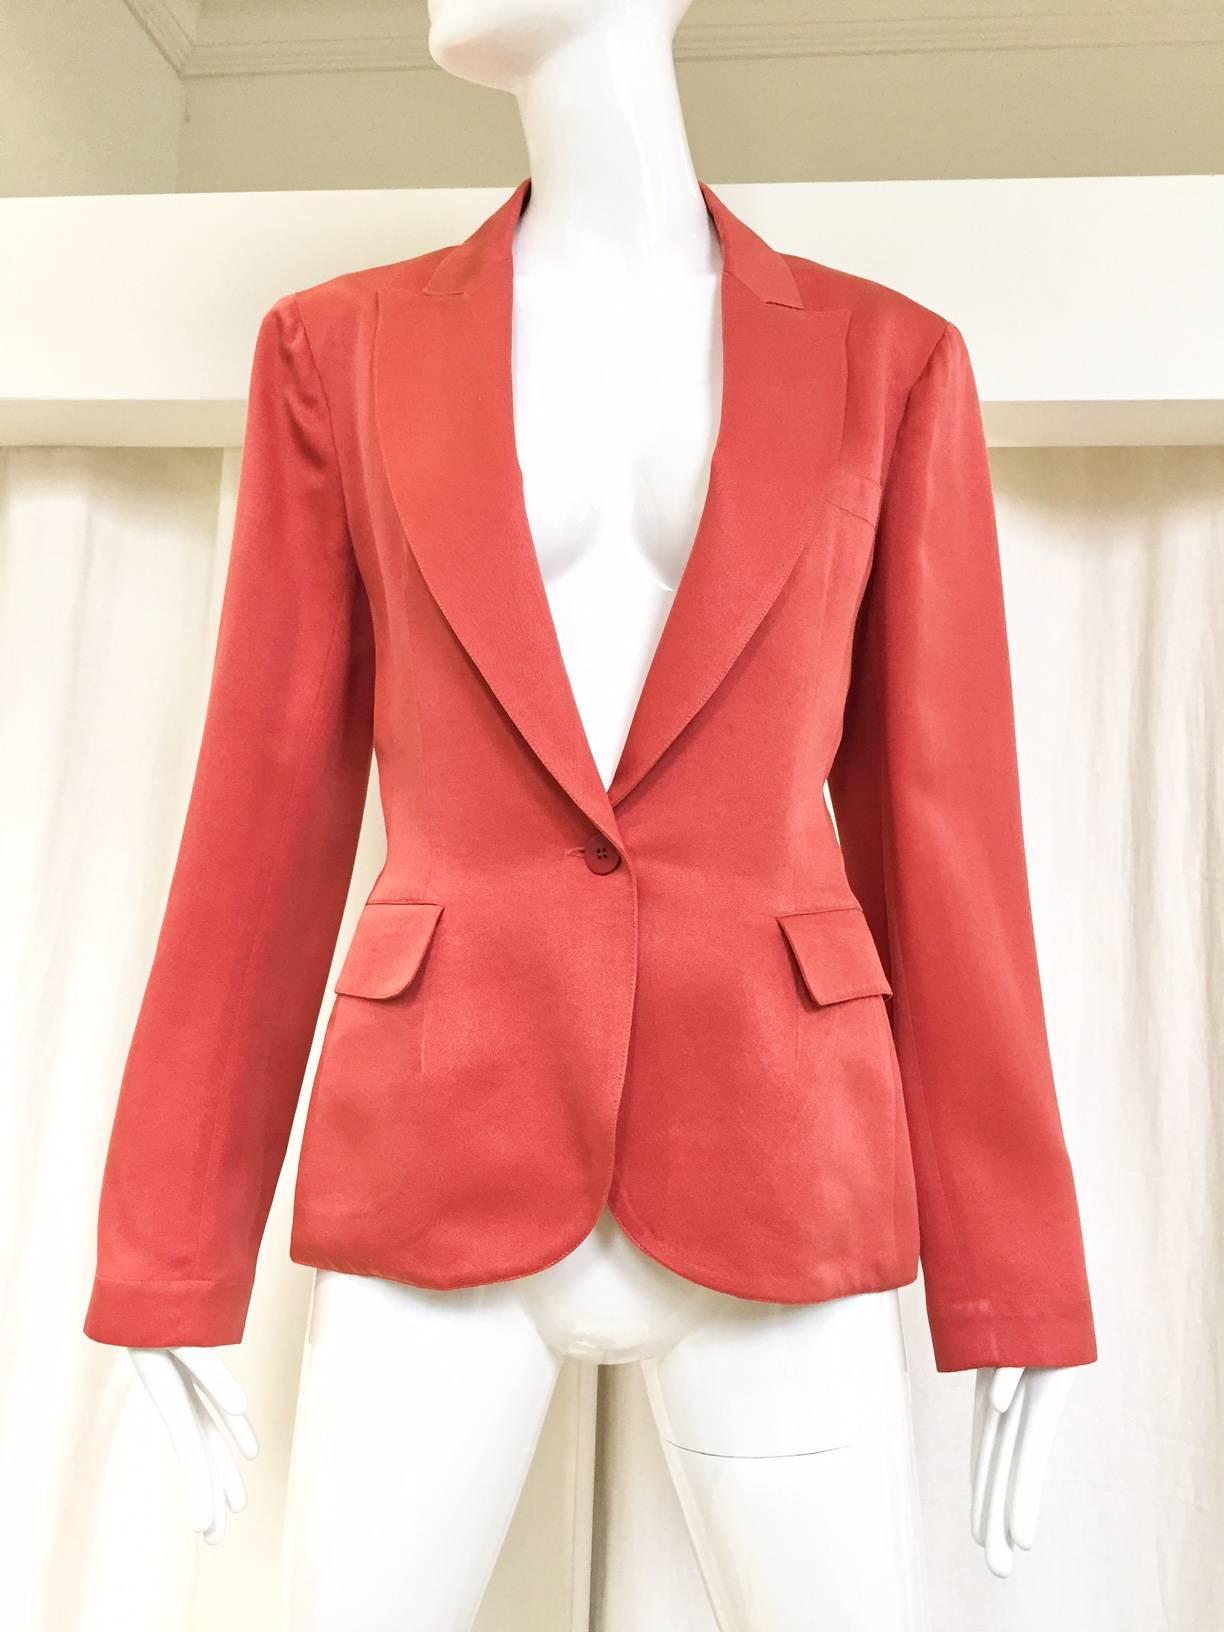 Vintage  ALAIA silk fitted blazer in coral salmon color. fit medium  Size: 4/6
Bust: 34"/ Waist: 29"/ hip: 39"/ Lenght: 24"/ Sleeve: 24"